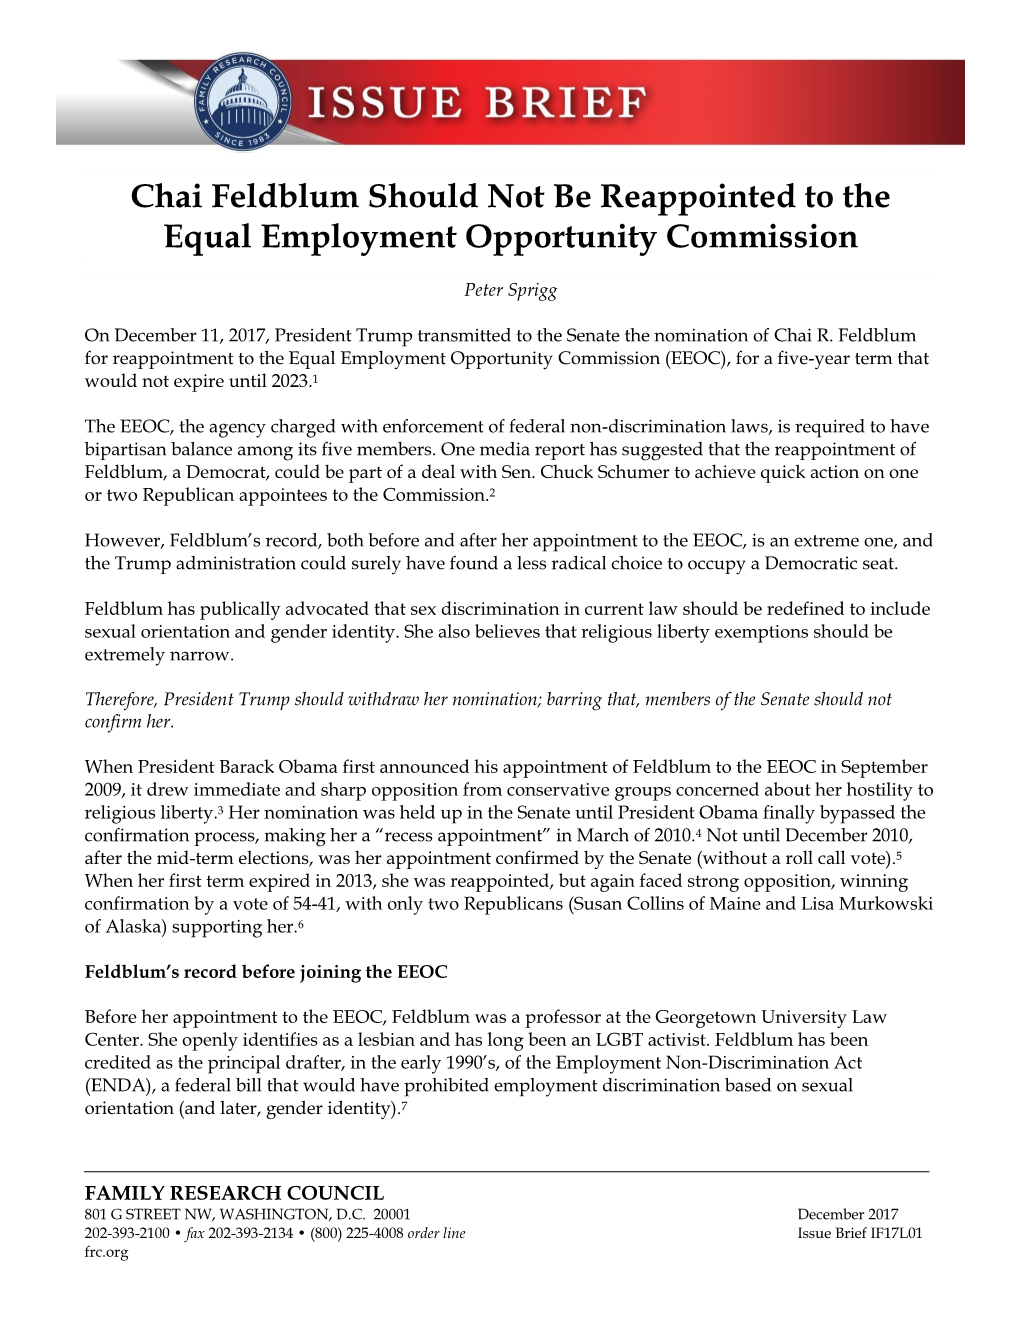 Chai Feldblum Should Not Be Reappointed to the Equal Employment Opportunity Commission